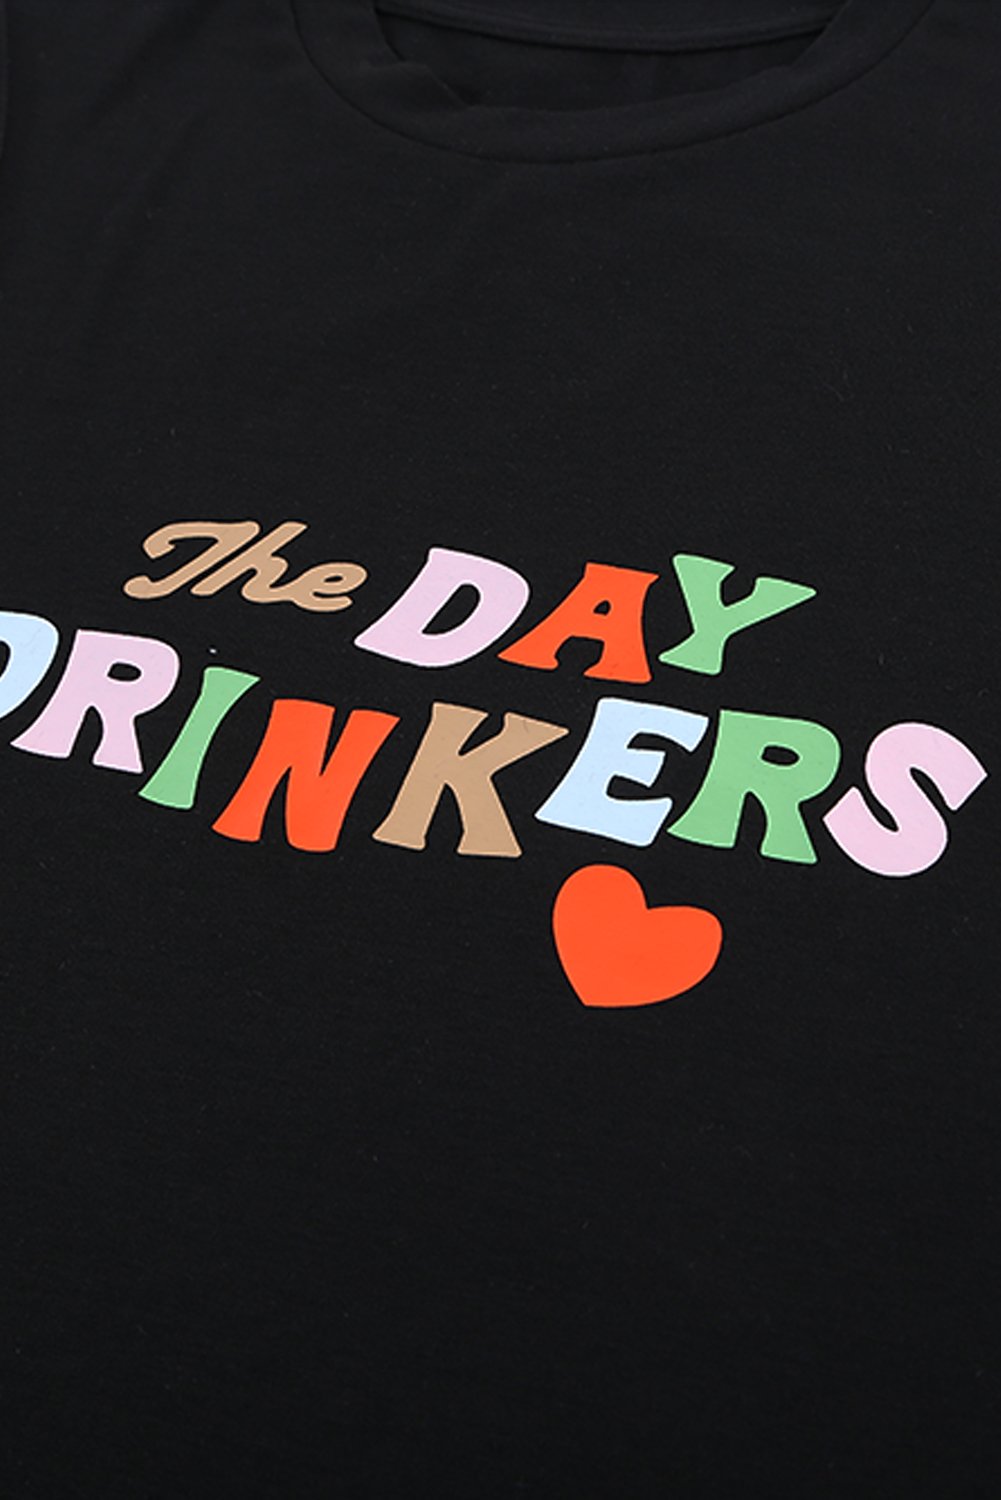 Womens Black The DAY DRINKERS Letters Print Tank Top